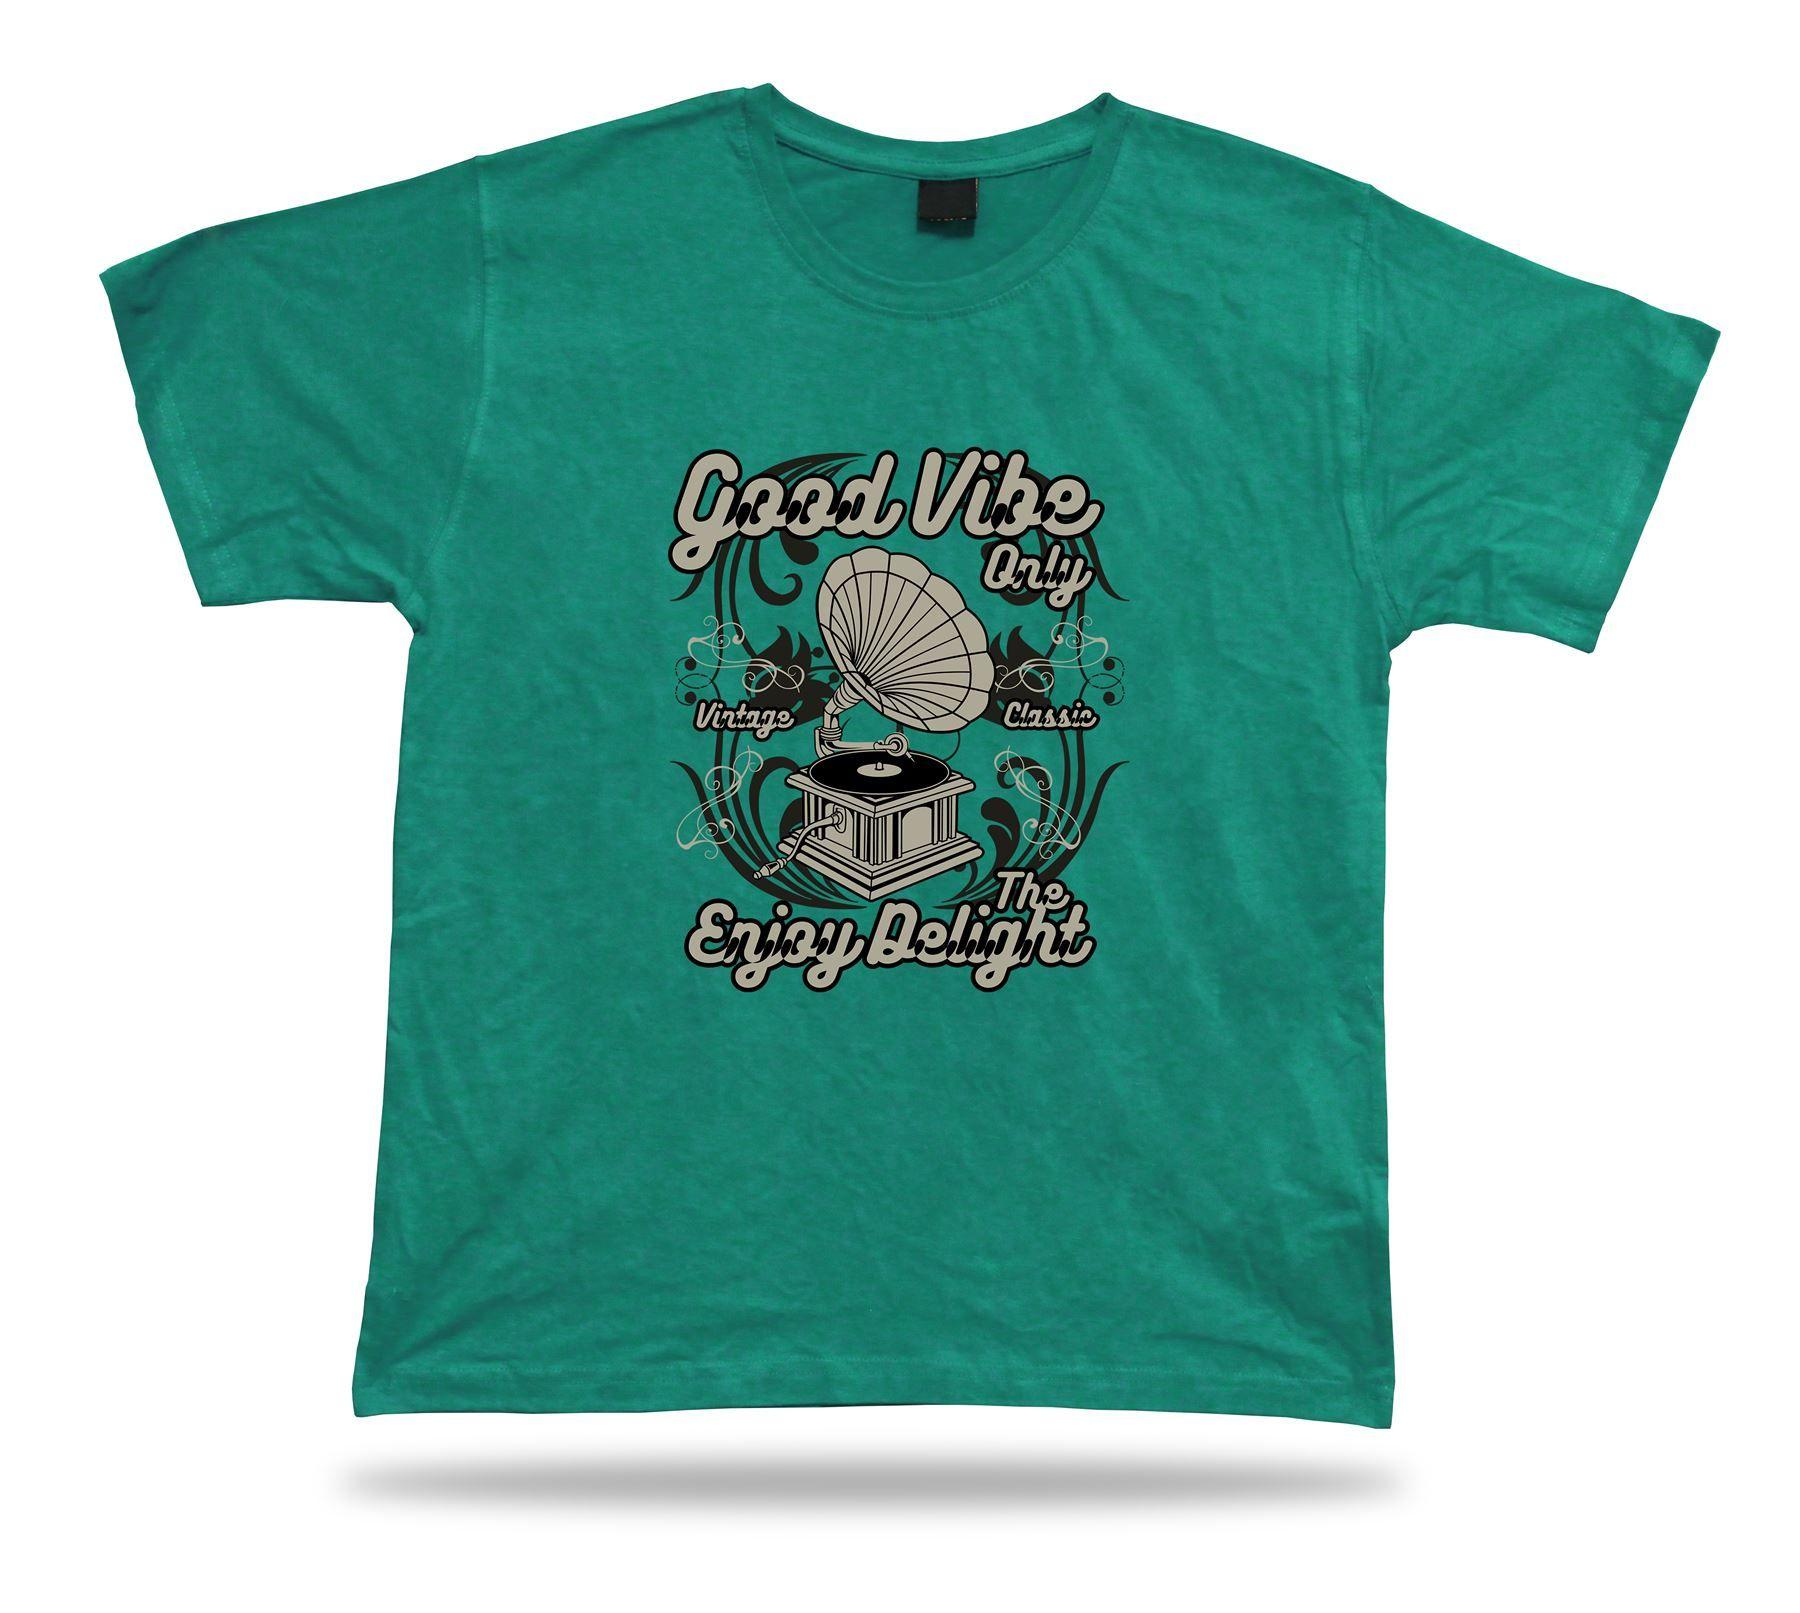 Only Clothing and Apparel Logo - Goodvibe only the enjoy delight vintage new apparel t shirt design ...